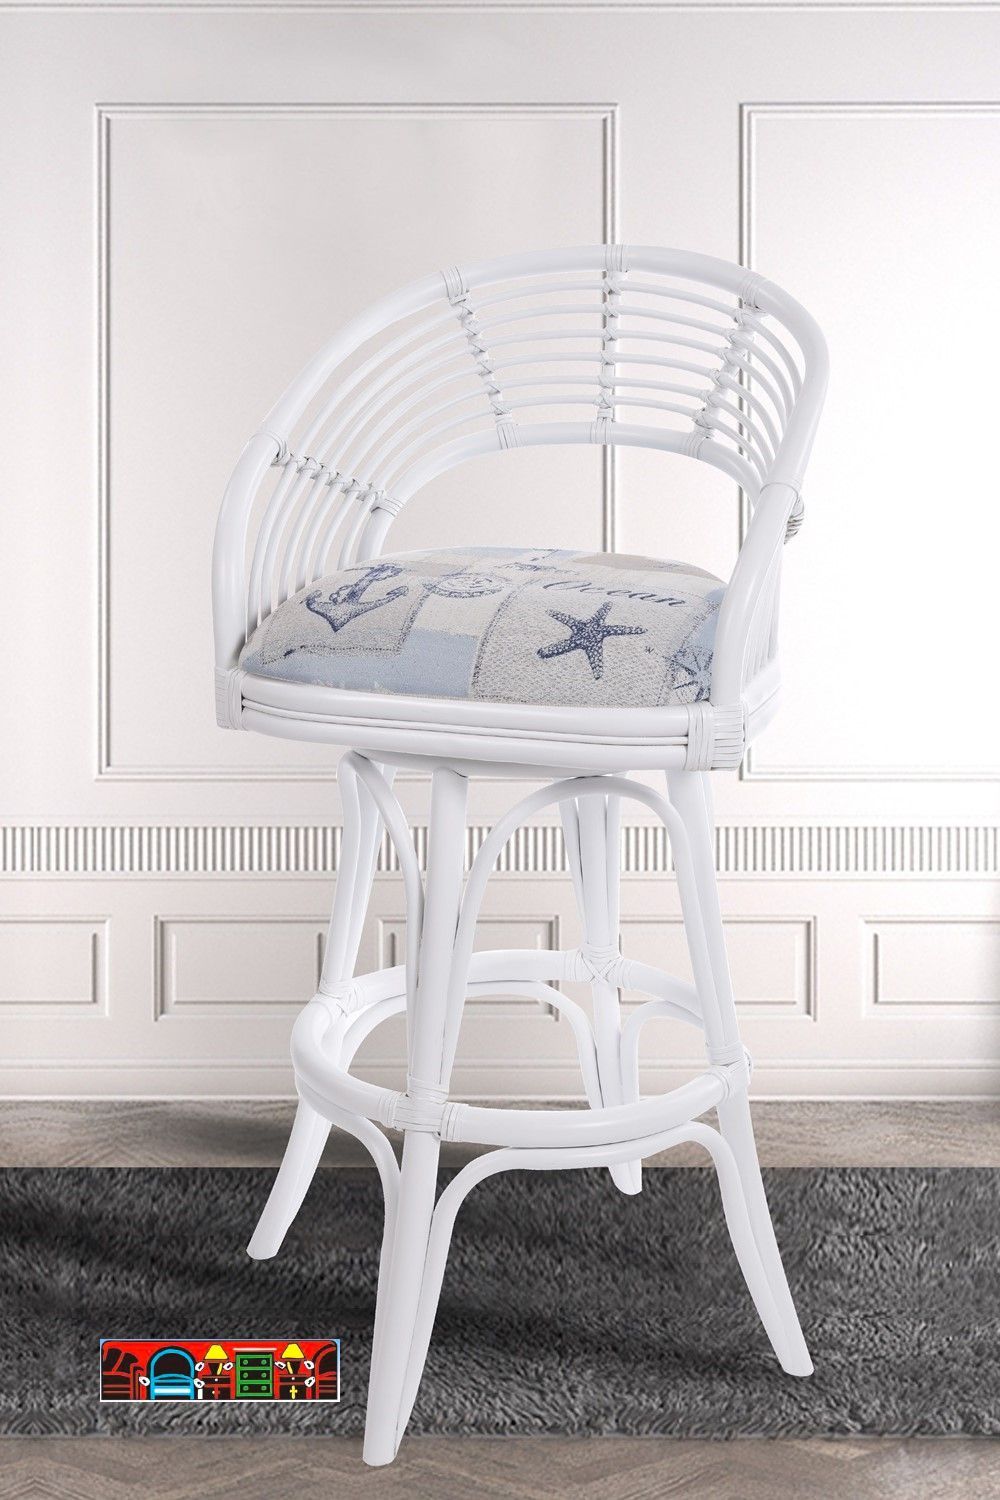 The Bali Barstool features rattan material, a white finish, a swivel function, a cushion, and leather-wrapped joints. It is currently on sale at Bratz-CFW. Pictures in a coastal cushion.